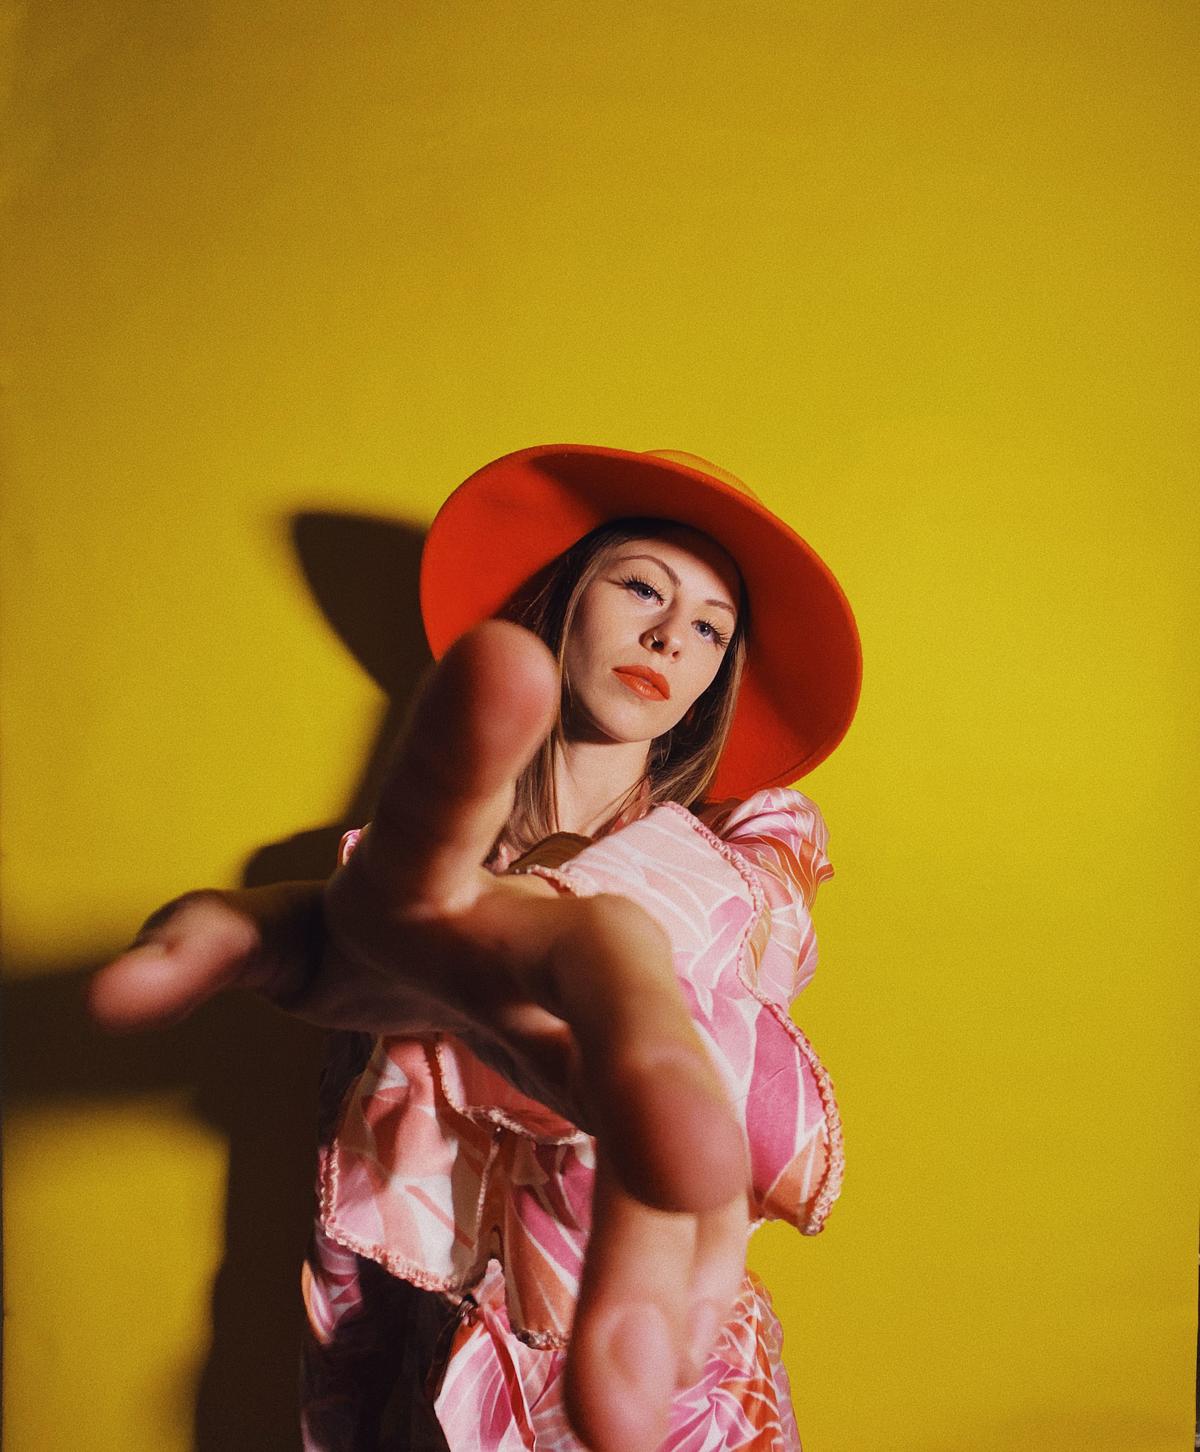 iPhone 11 - Portrait of young woman wearing pink robe and orange hat.